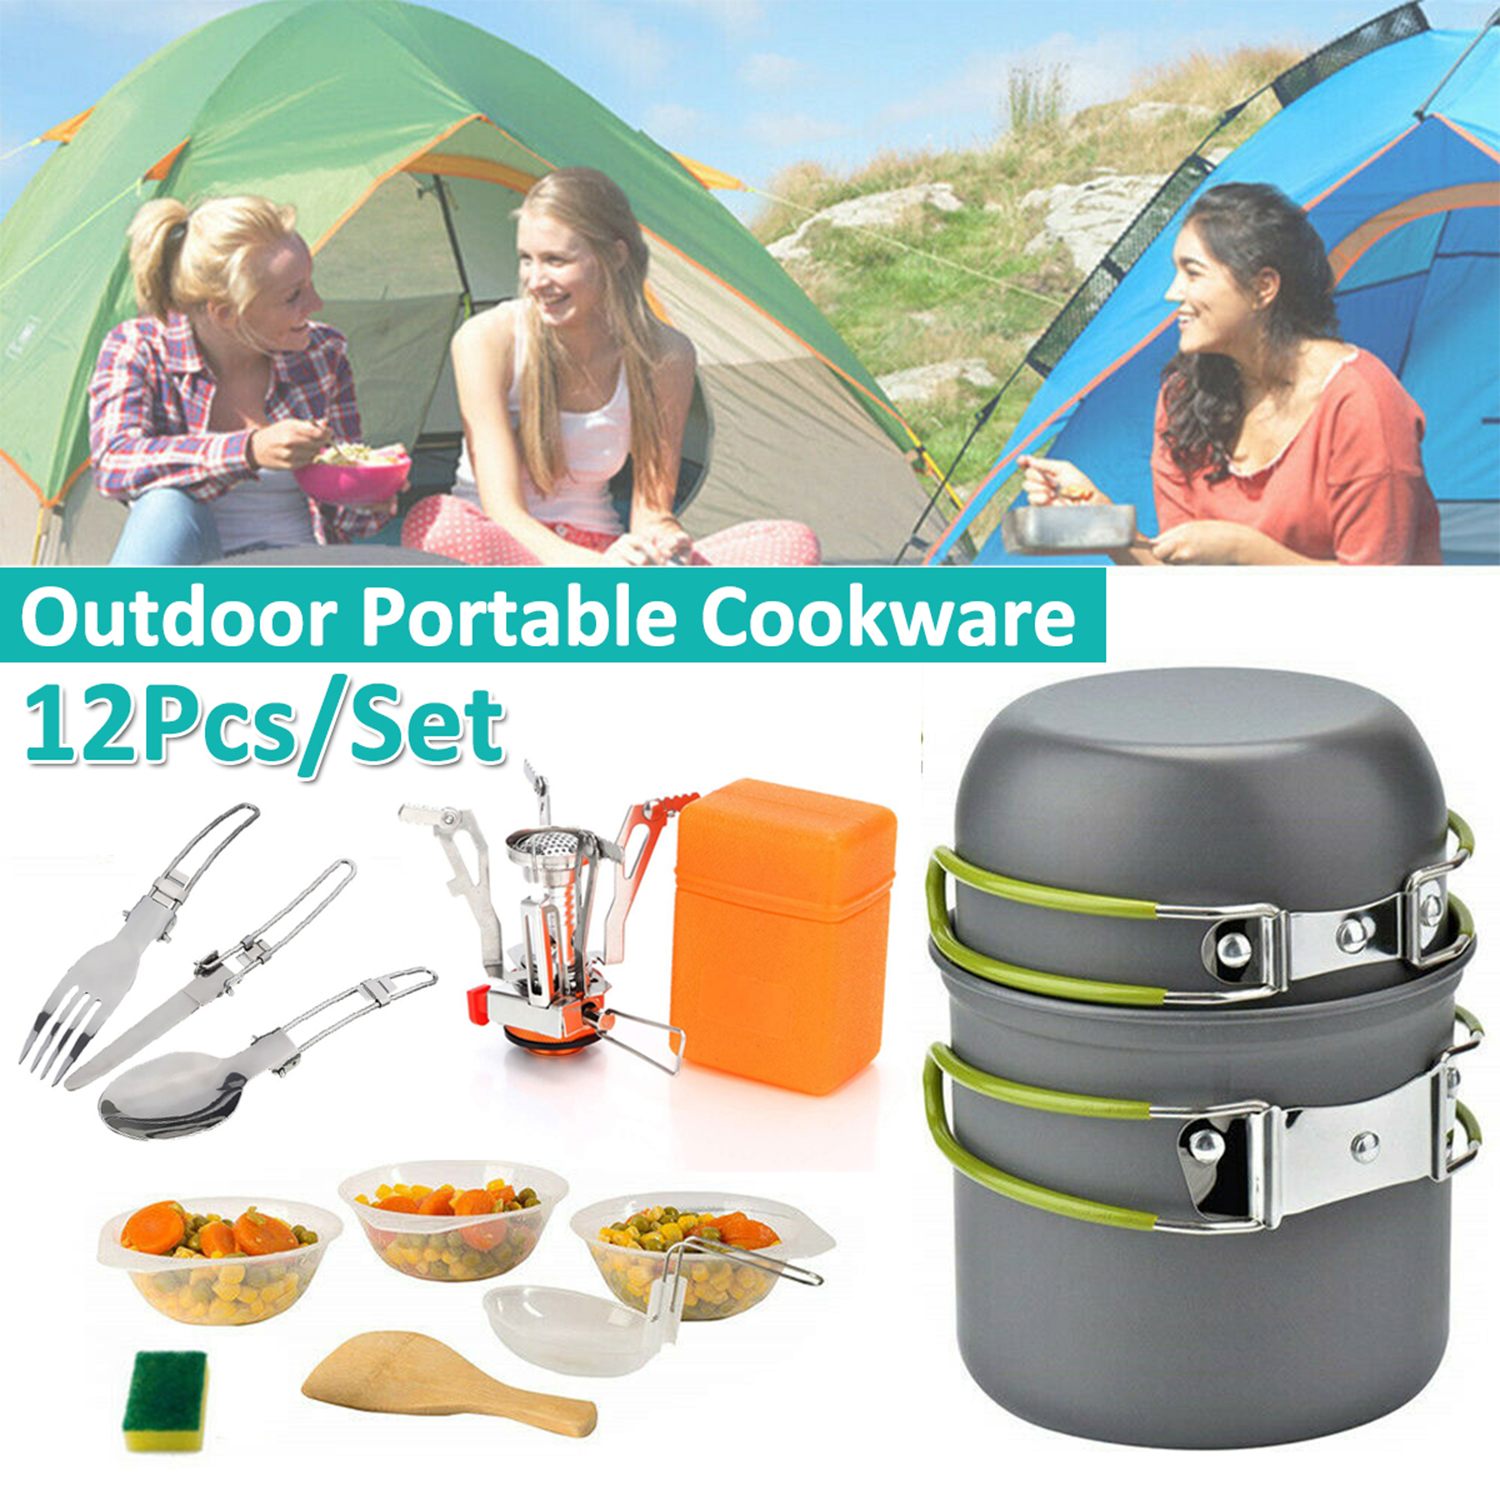 GL Portable Light Outdoor Camping Cookware Sets Gas Stove with Foldable Tableware Pan Dishwashing Sponge Hiking Picnic Tool 28